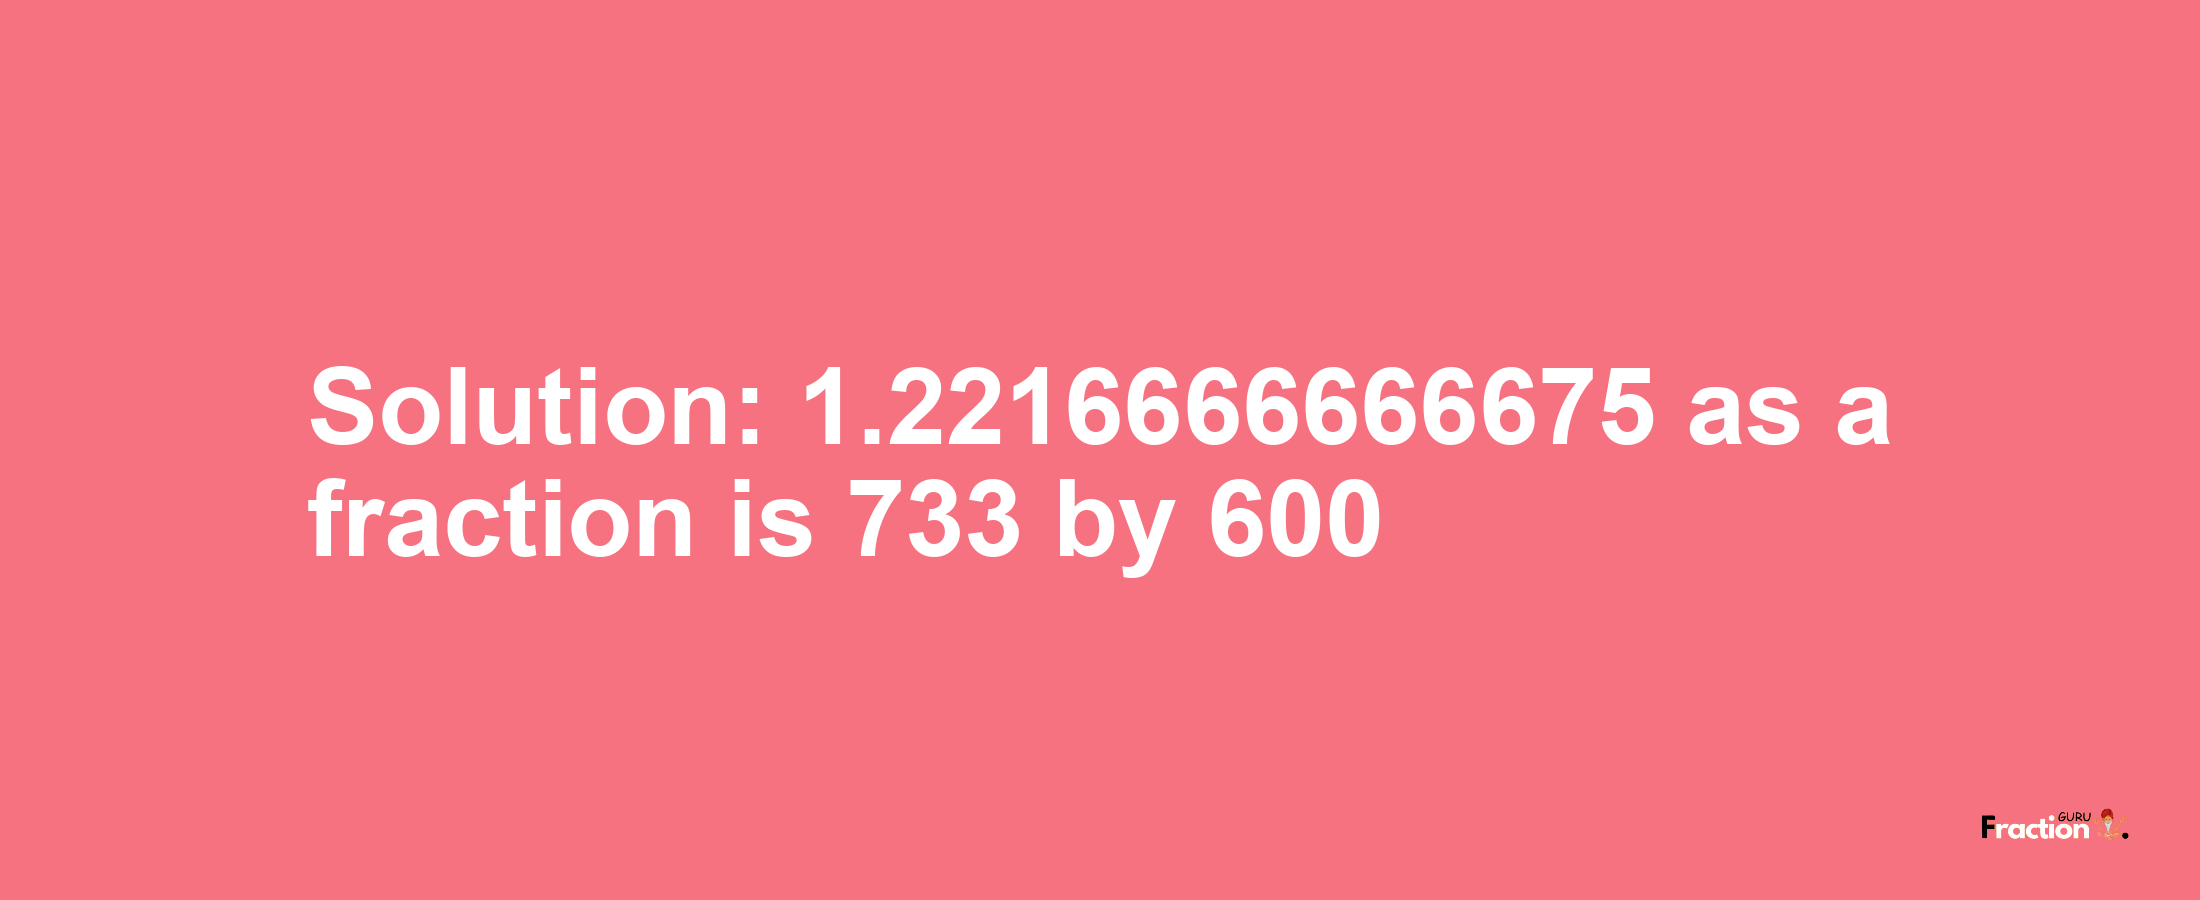 Solution:1.2216666666675 as a fraction is 733/600